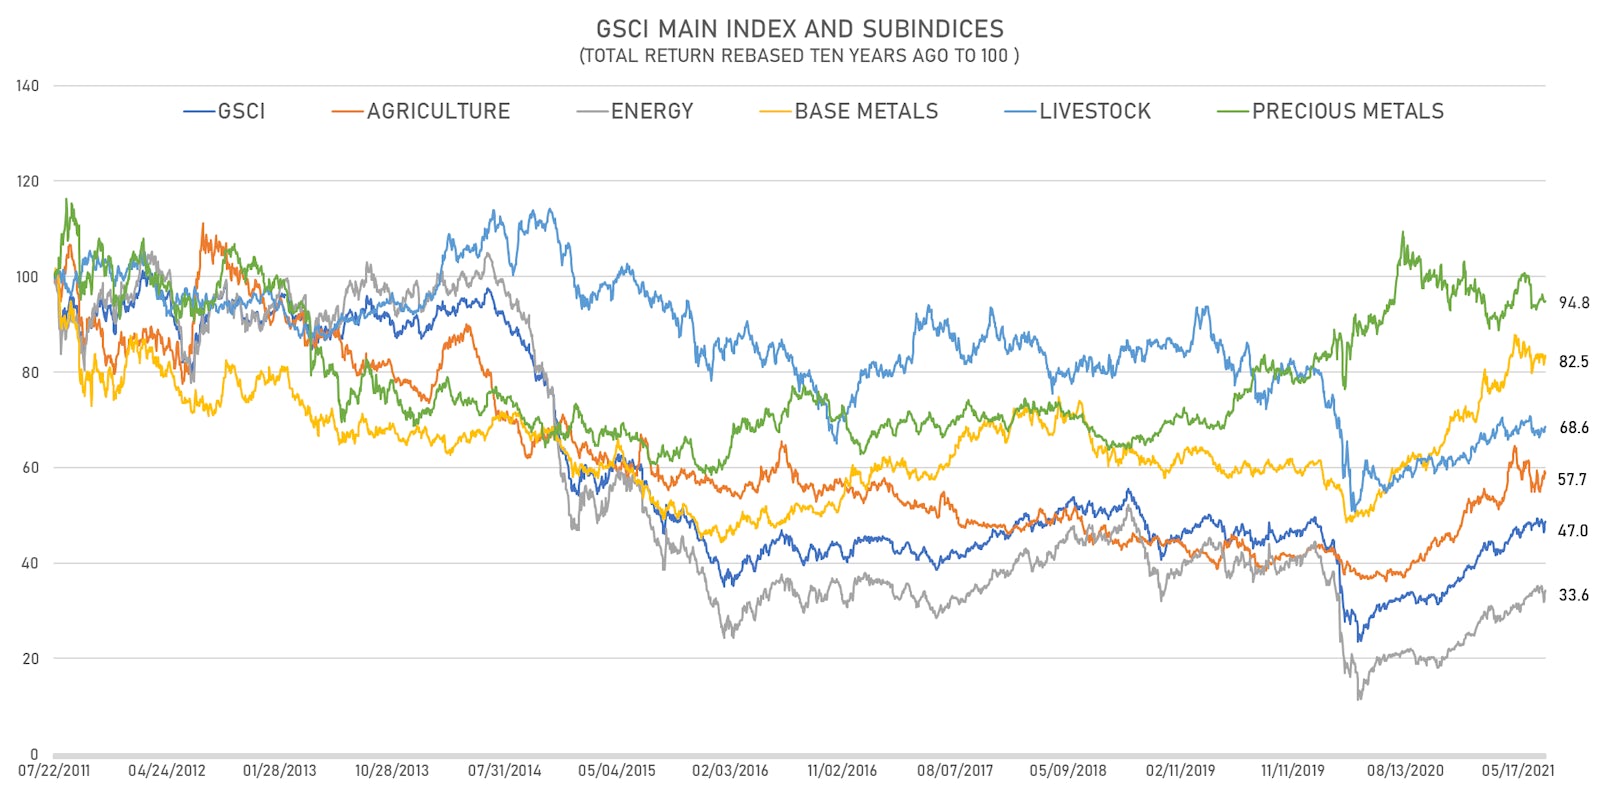 S&P GSCI Sub-Indices Performance Over The Past 10 Years | Sources: ϕpost, FactSet data 